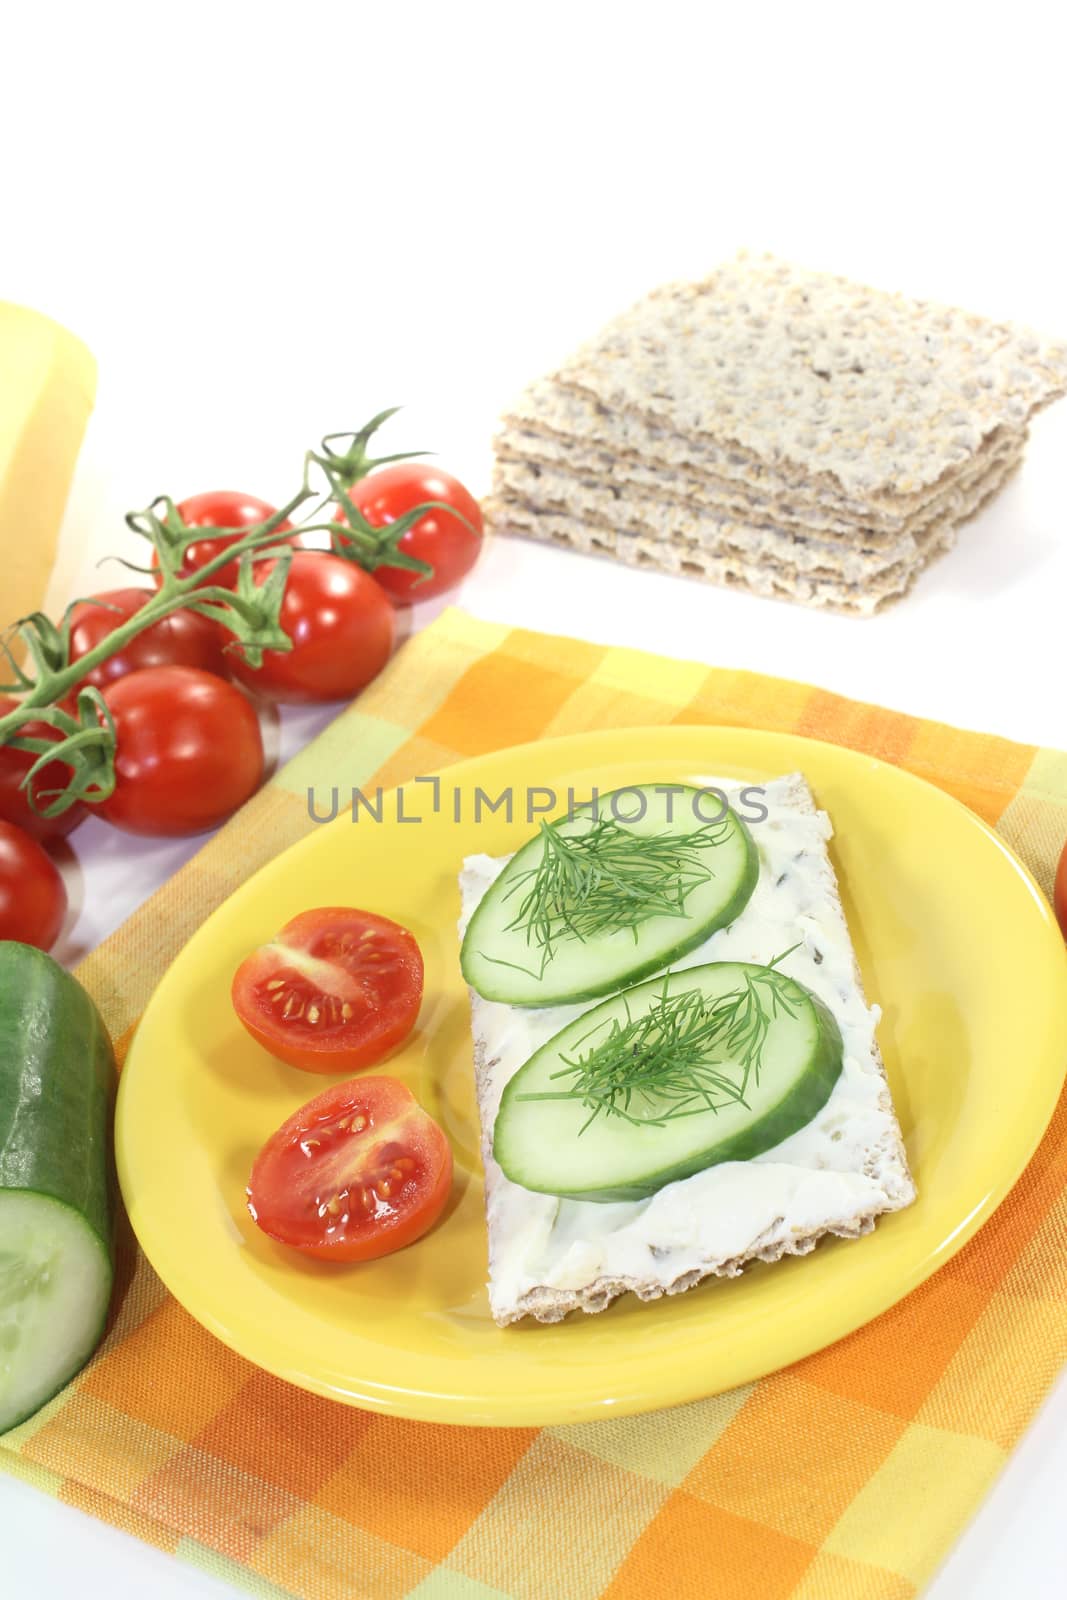 Crispbread with cream cheese and dill on a bright background